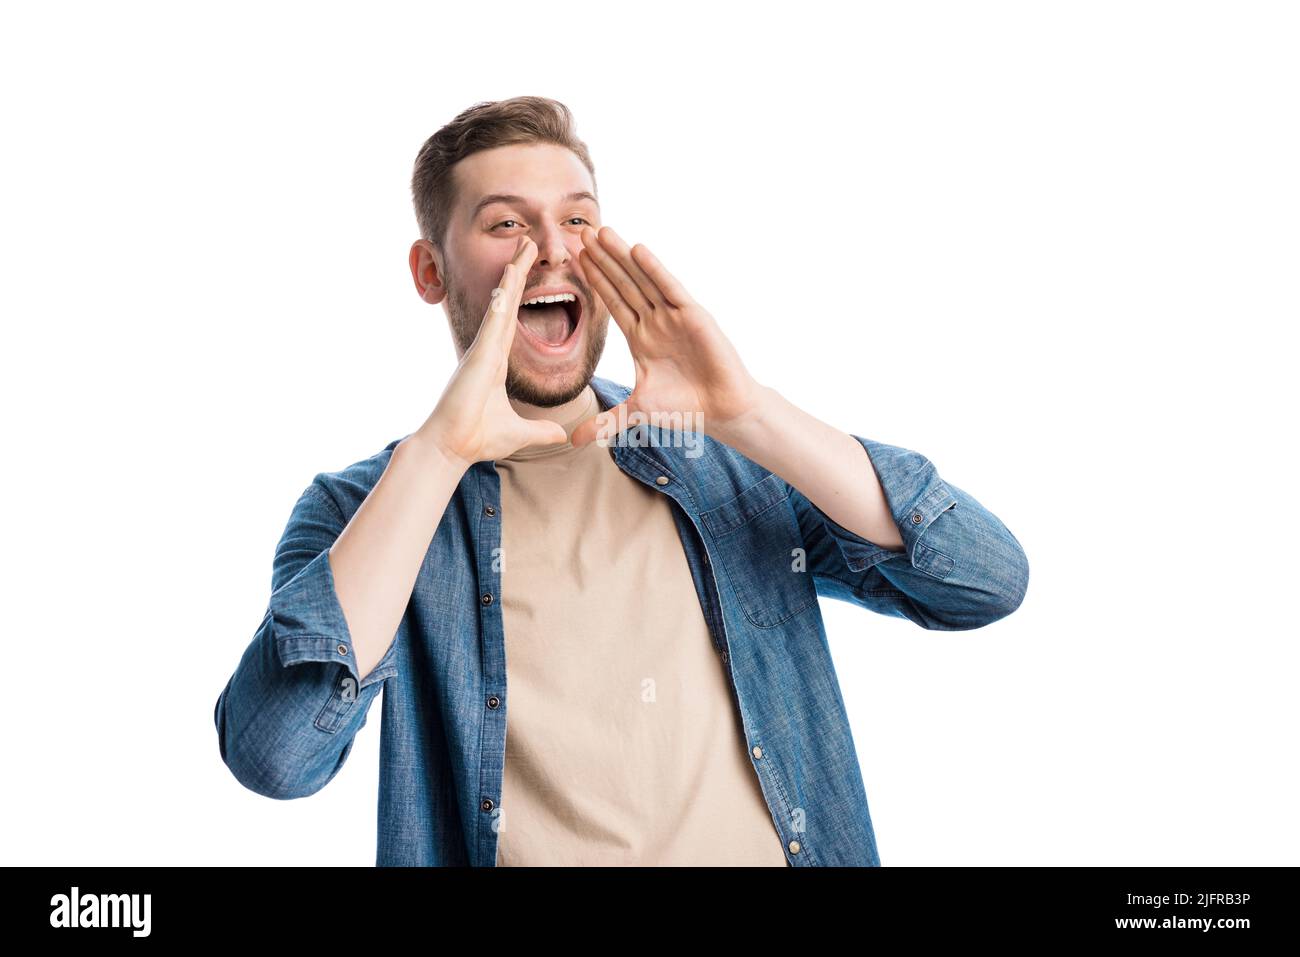 Man screaming out loud Stock Photo